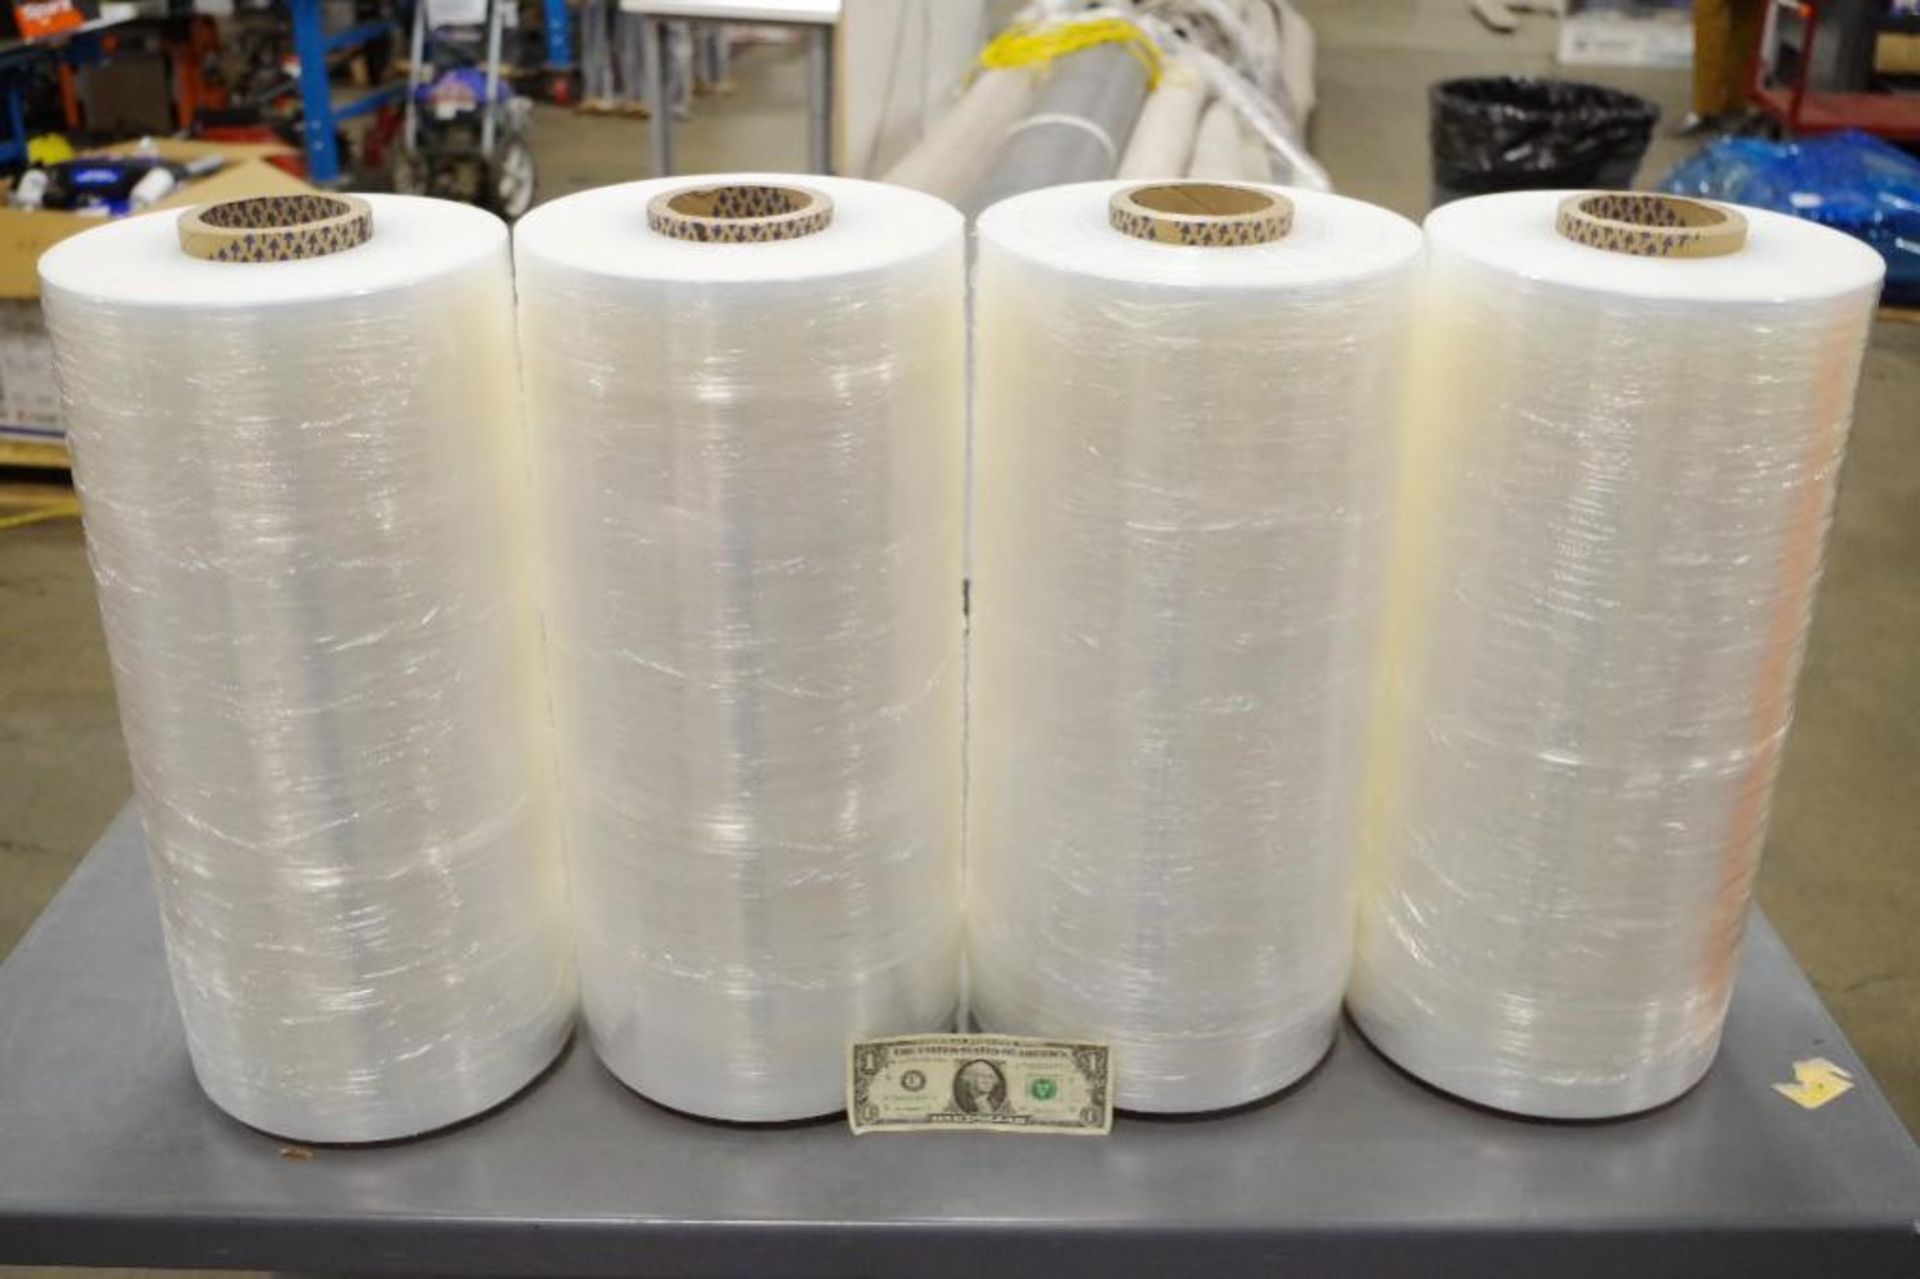 [4] NEW FORCE V Shrink Wrap Large Rolls, Approx. 19.5"W x 9000'L - Image 2 of 4